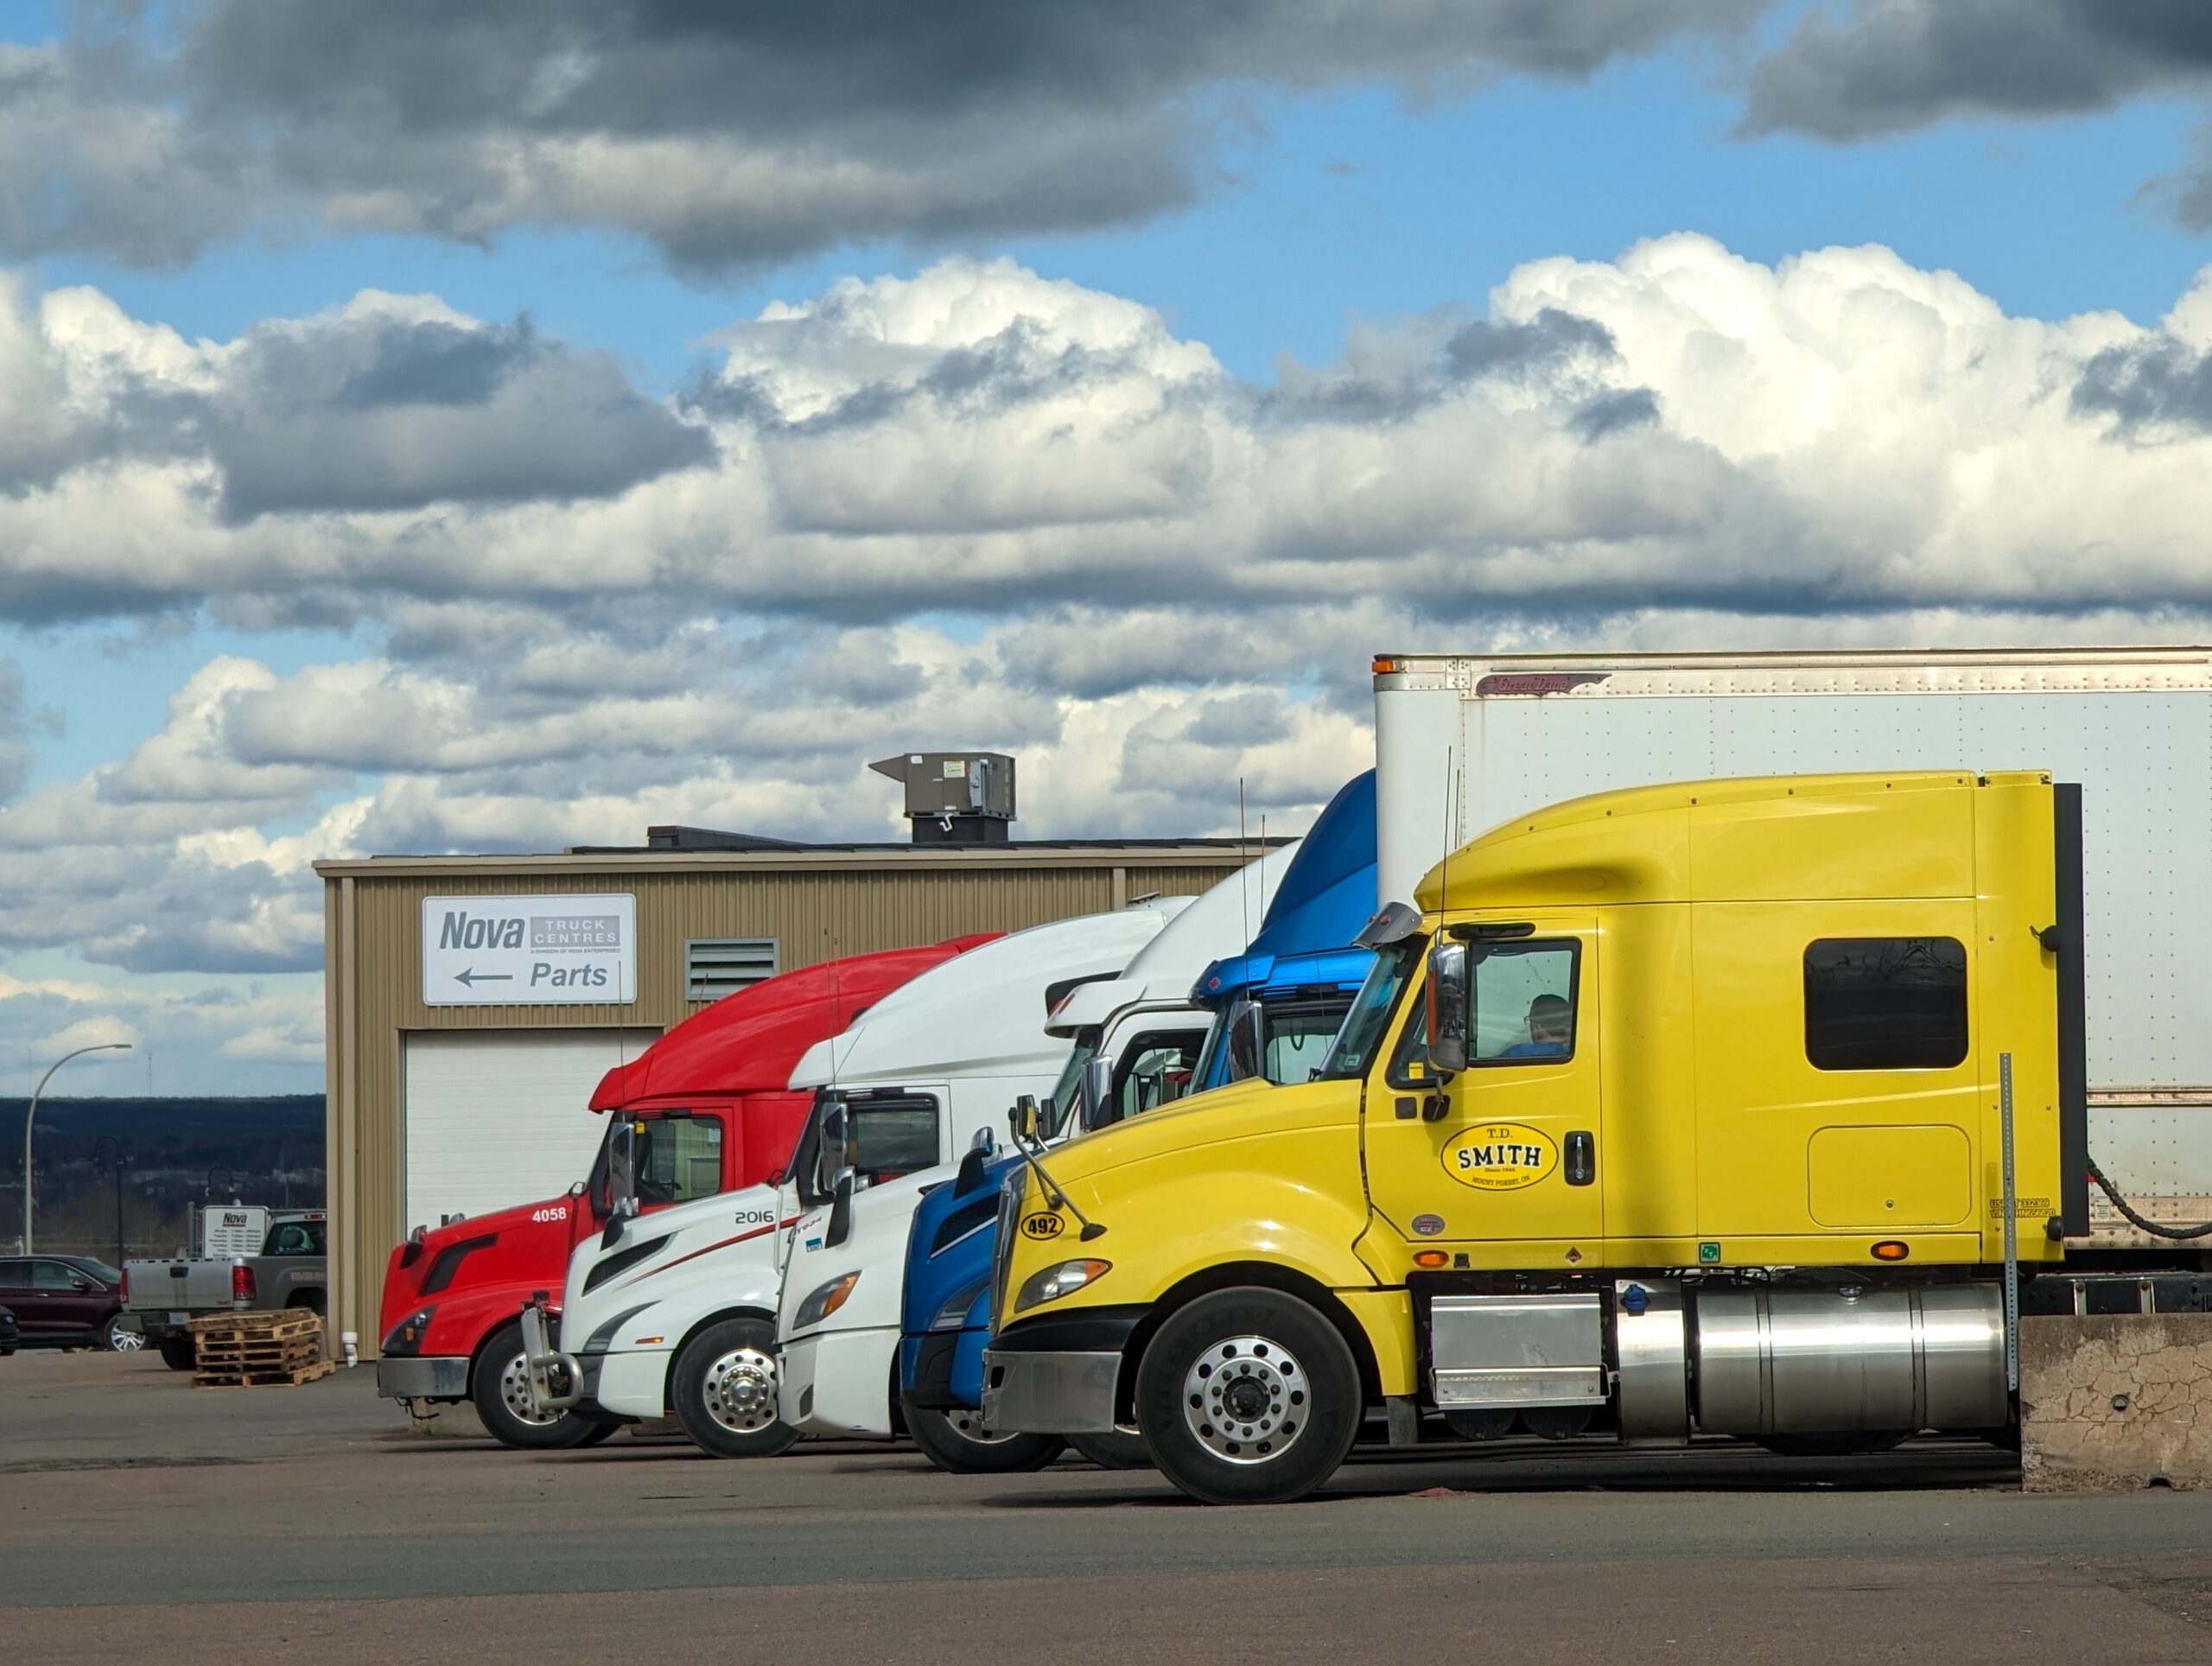 Refrigerated Trucking Companies